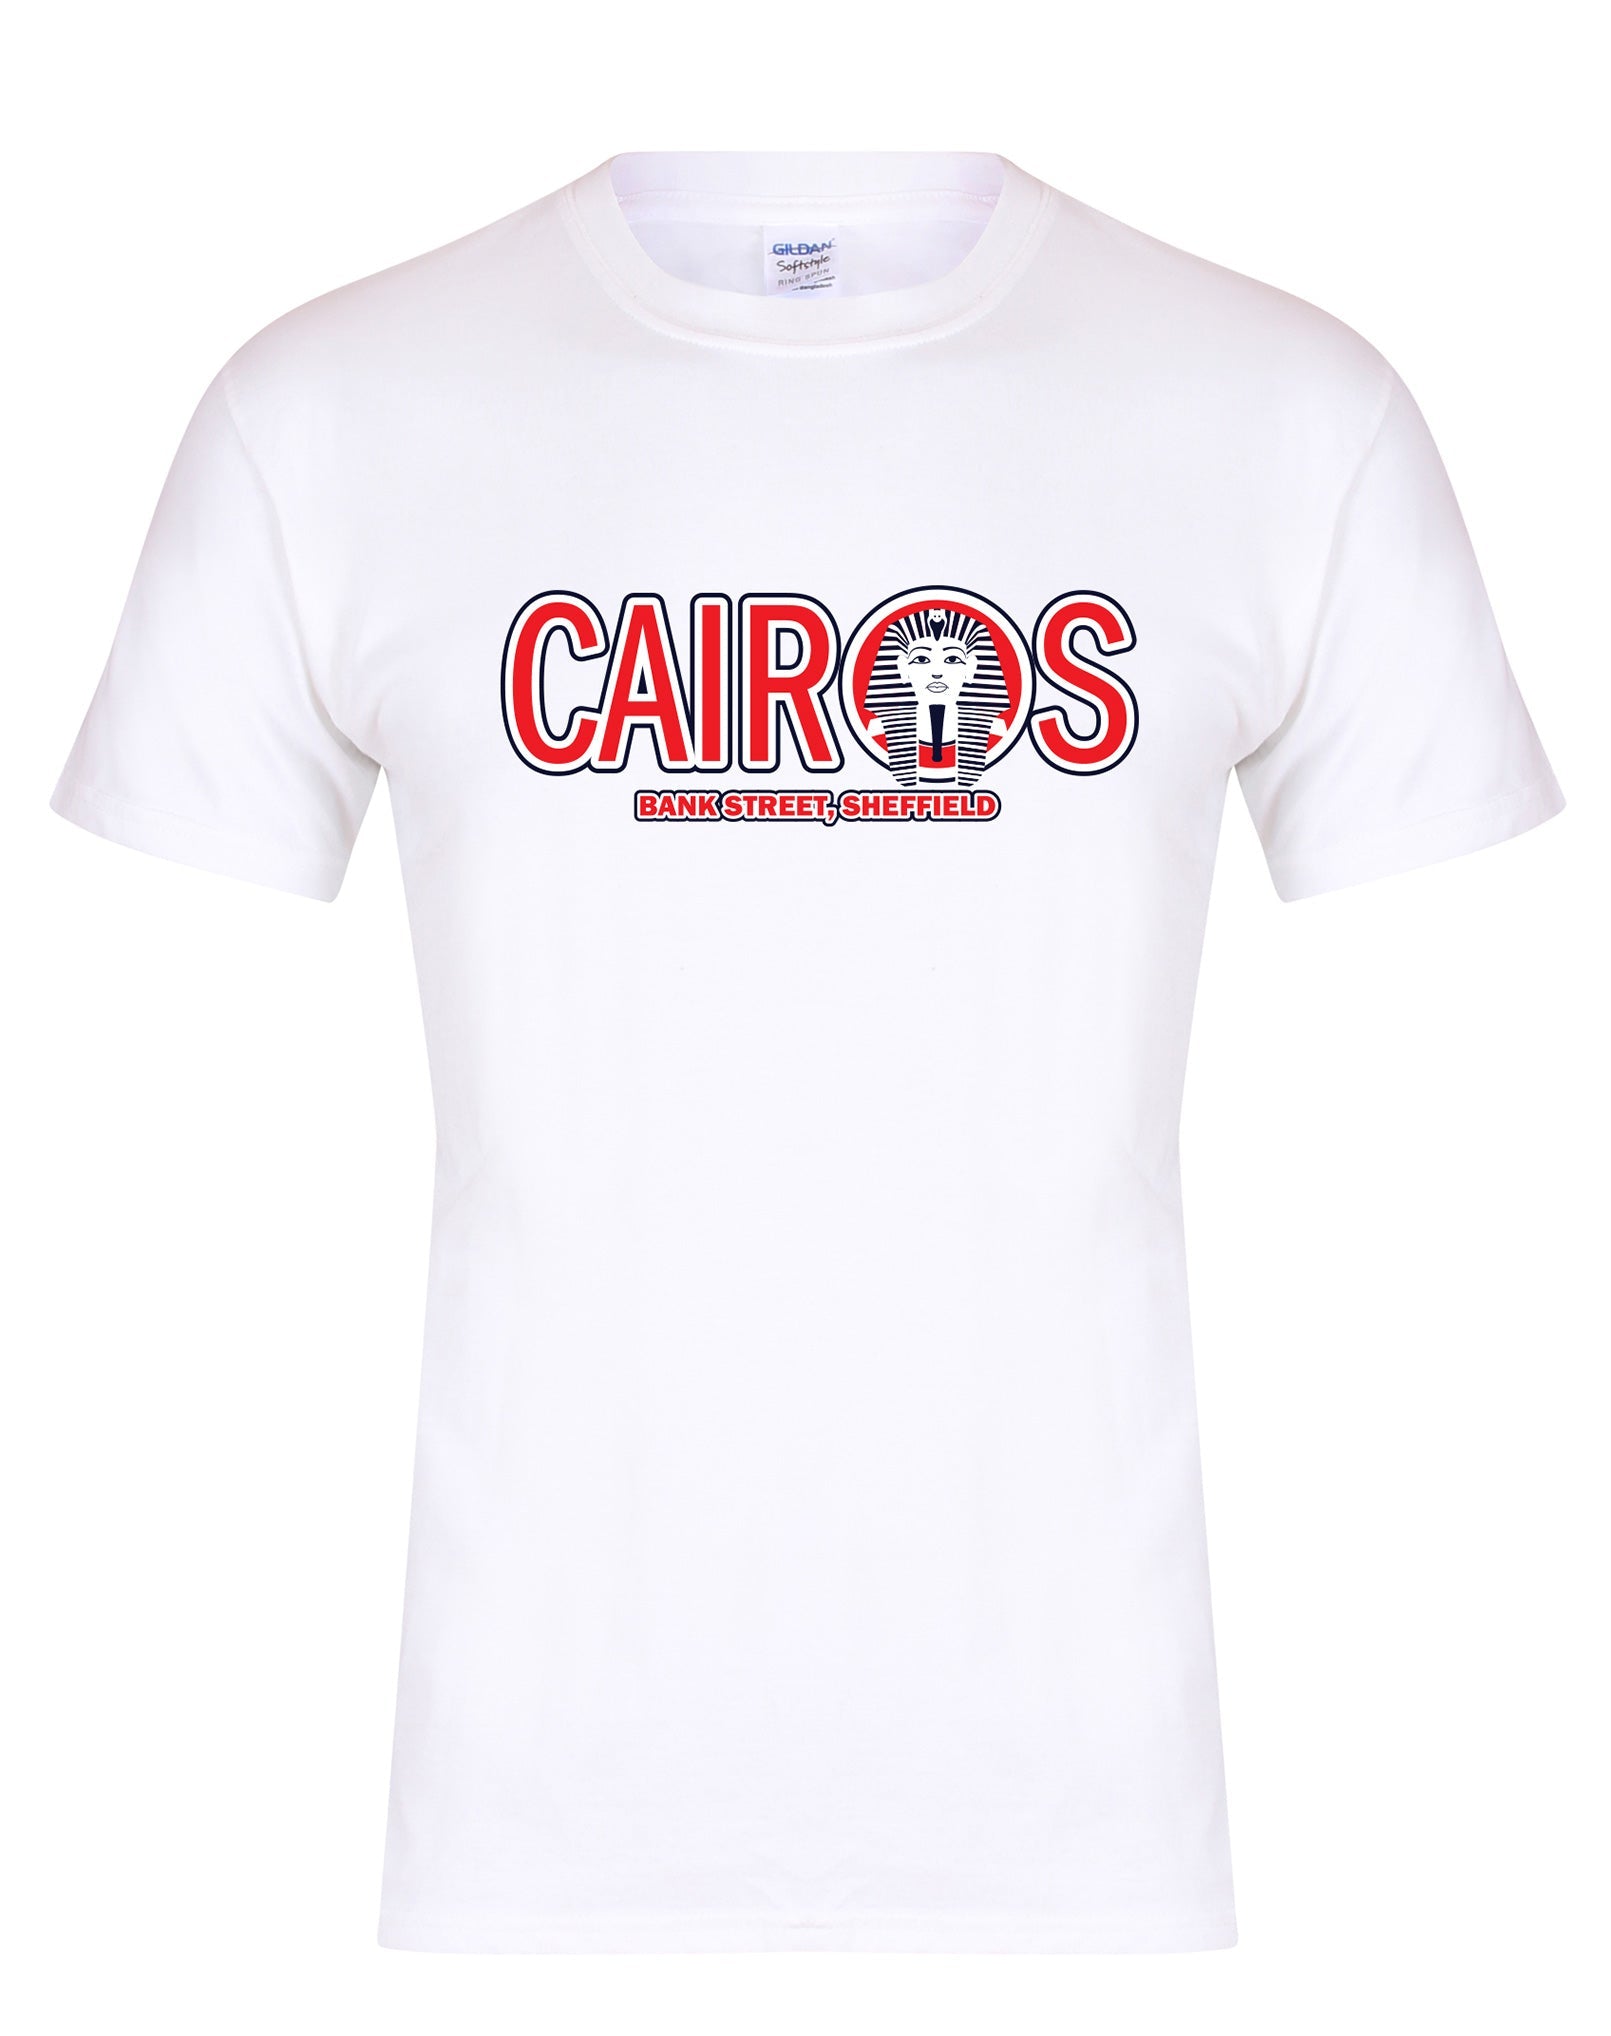 Cairos unisex fit T-shirt - various colours - Dirty Stop Outs